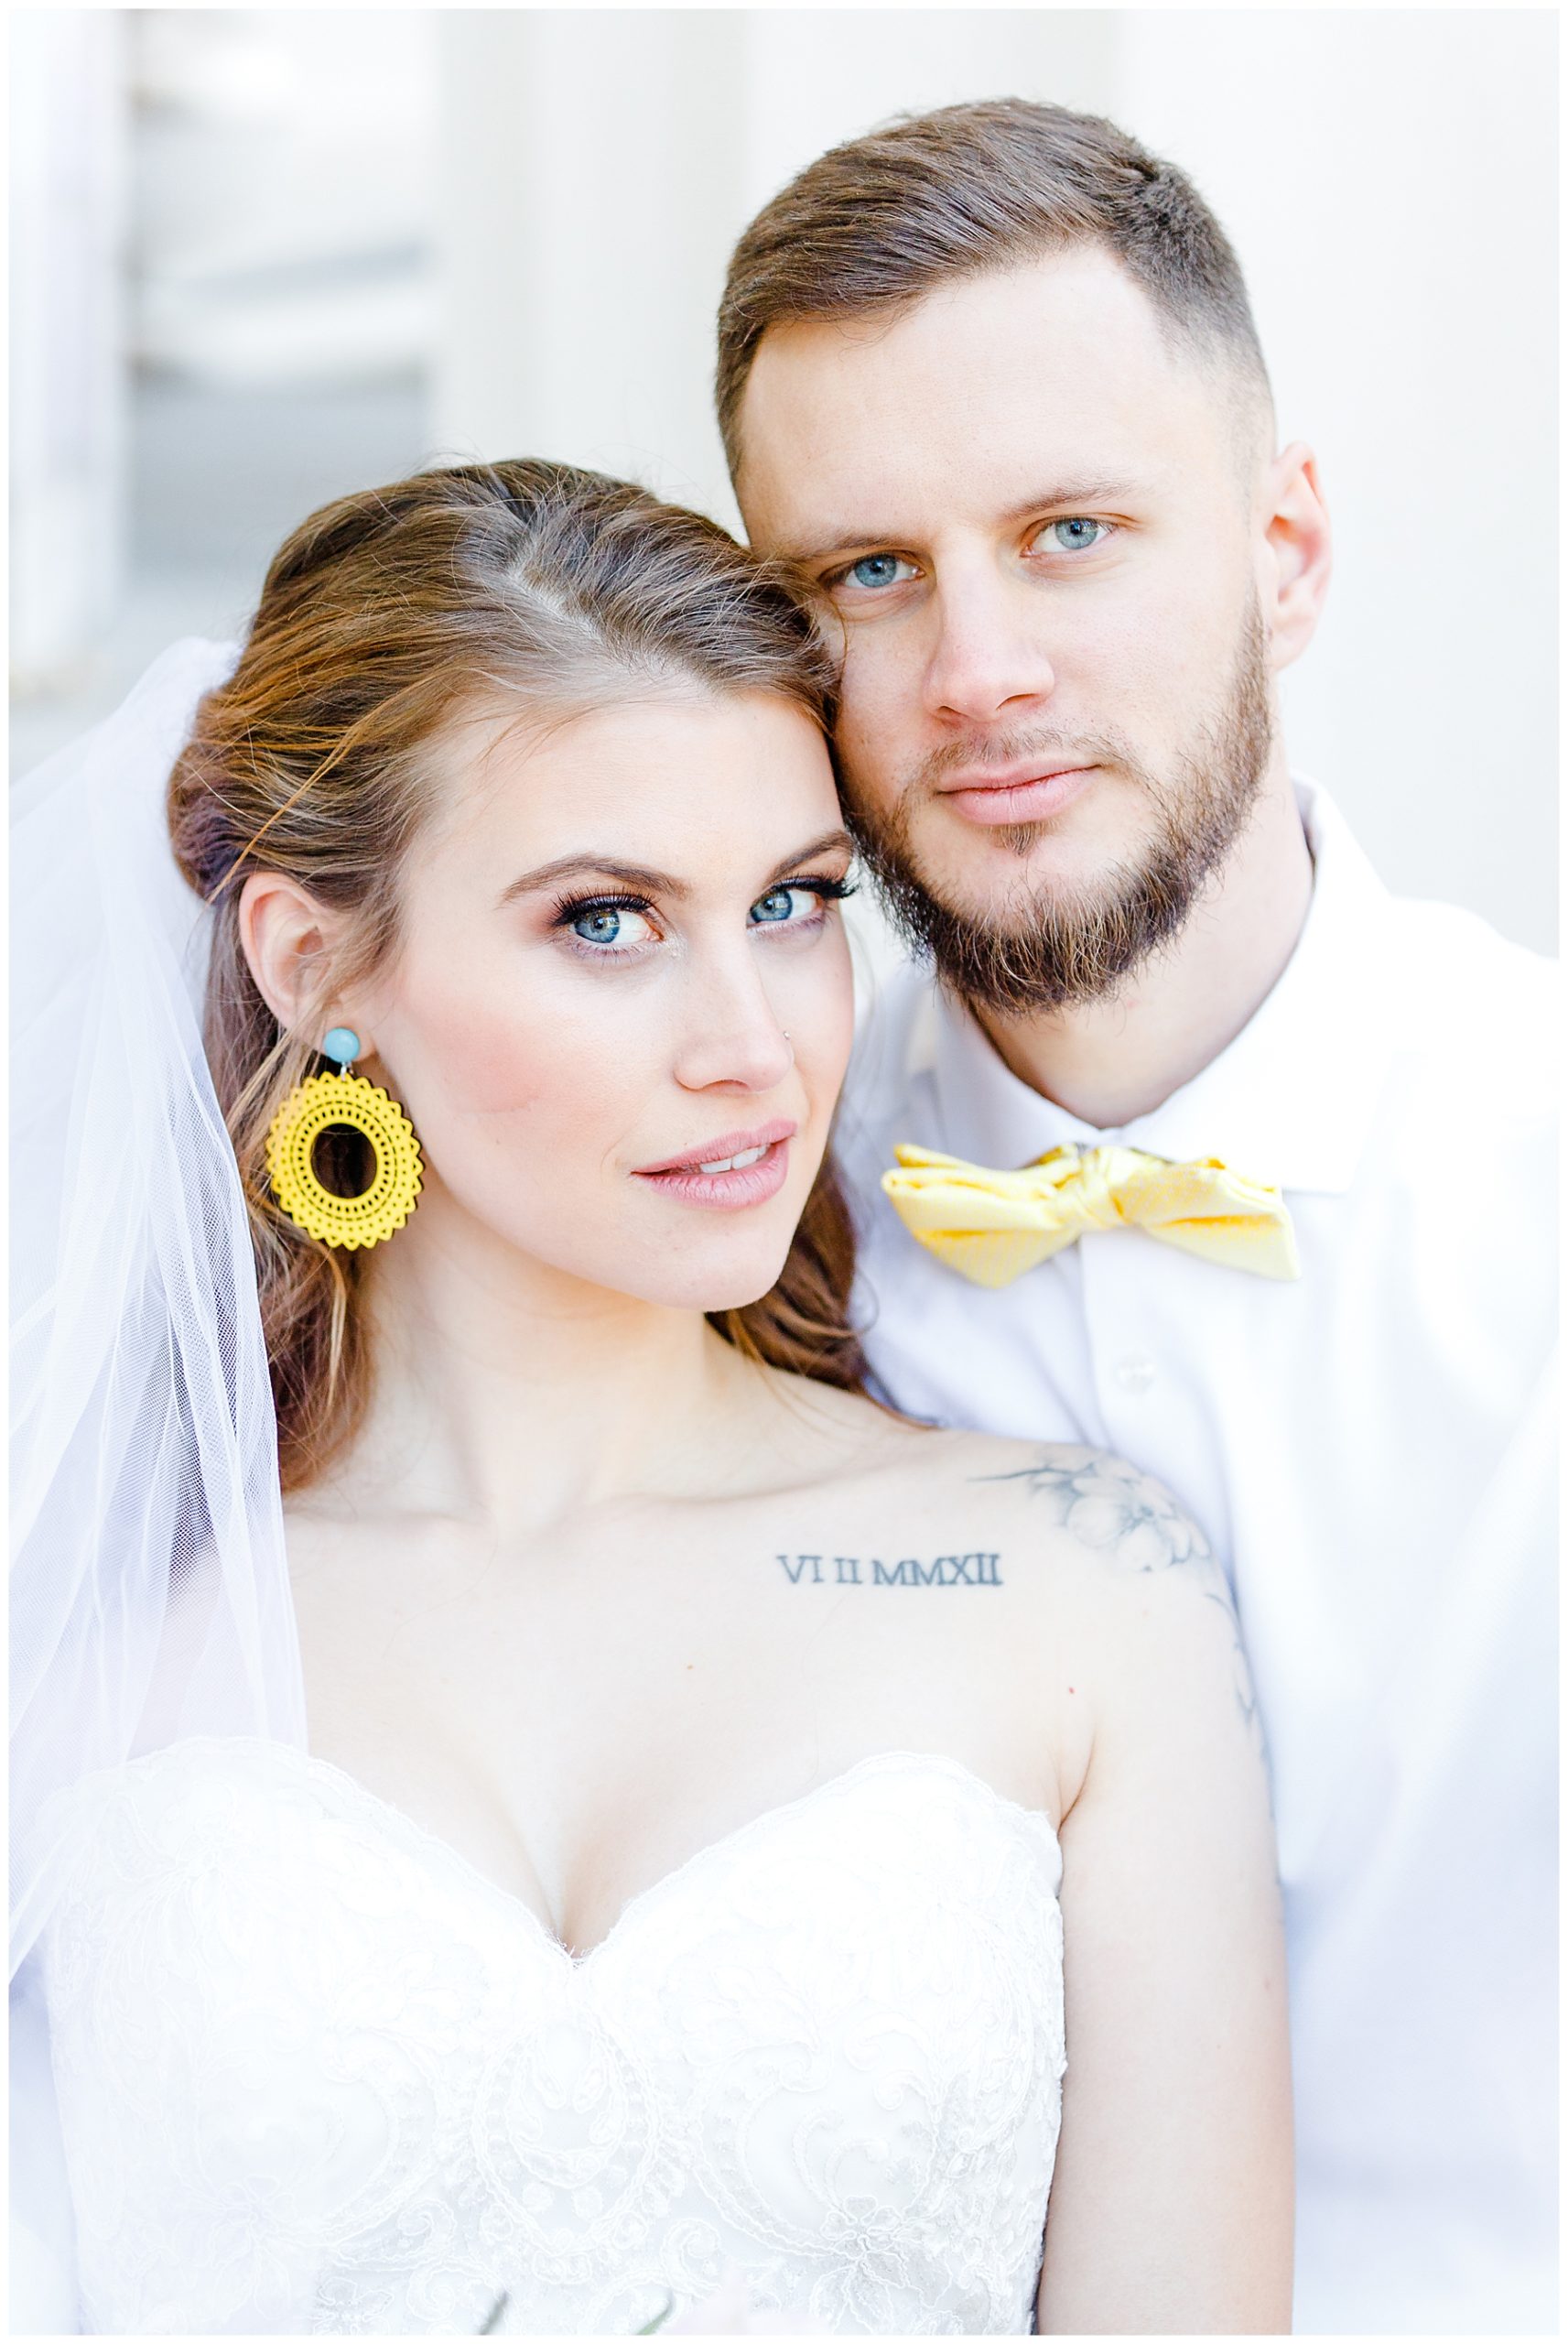 newlyweds with yellow accessories